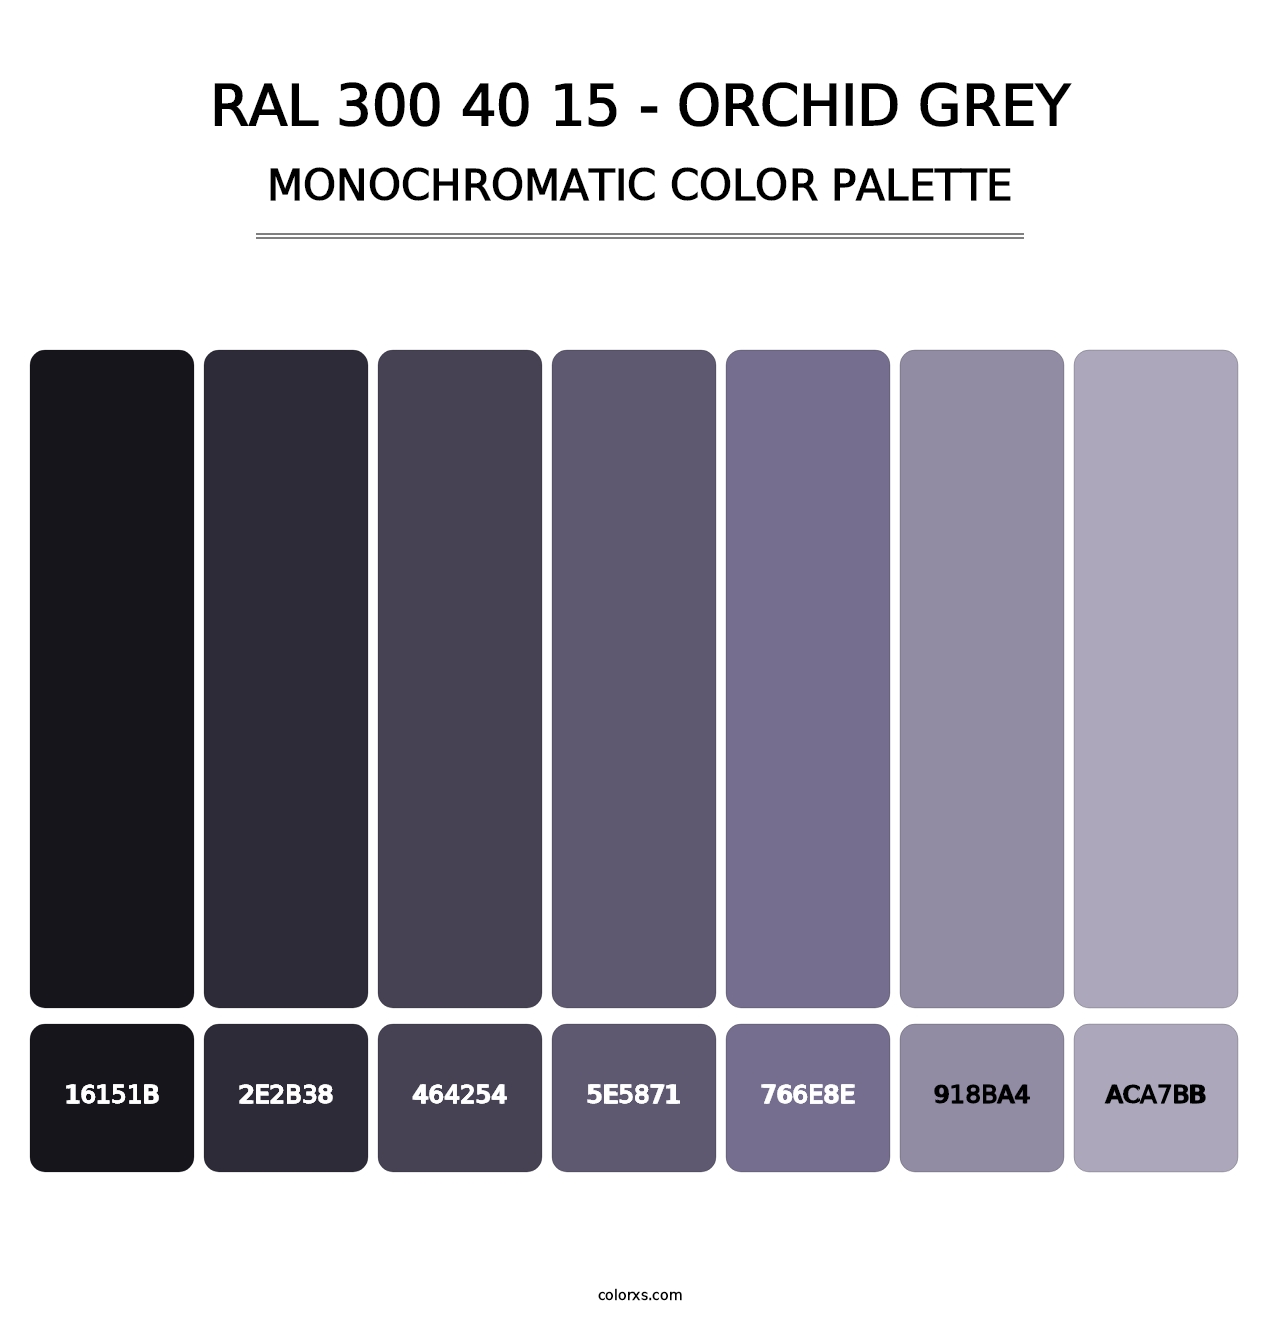 RAL 300 40 15 - Orchid Grey - Monochromatic Color Palette